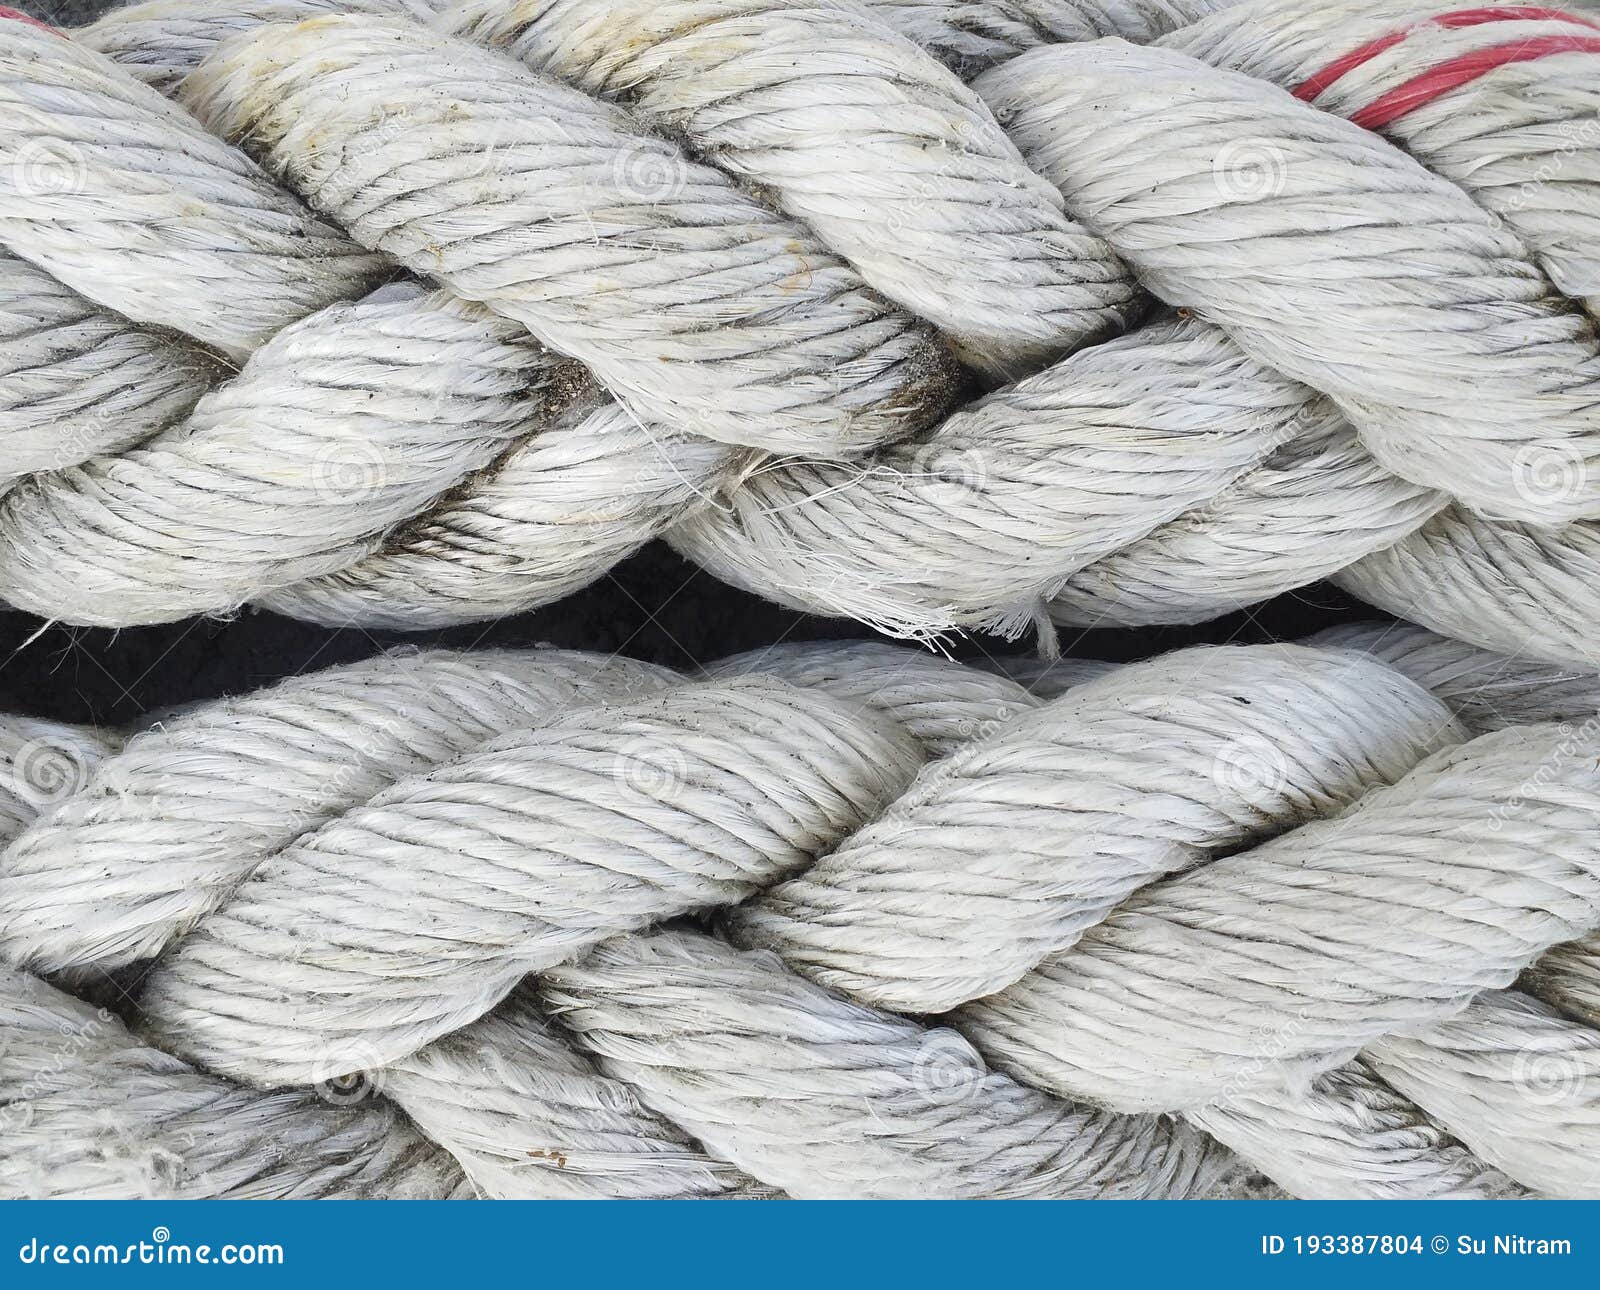 Background of Braided Old Thick Ropes. Sturdy Fishing Ropes To Tie Up the  Boat. Close Up. Detail of a Used Trawler White Fishing Stock Photo - Image  of loop, anchor: 193387804